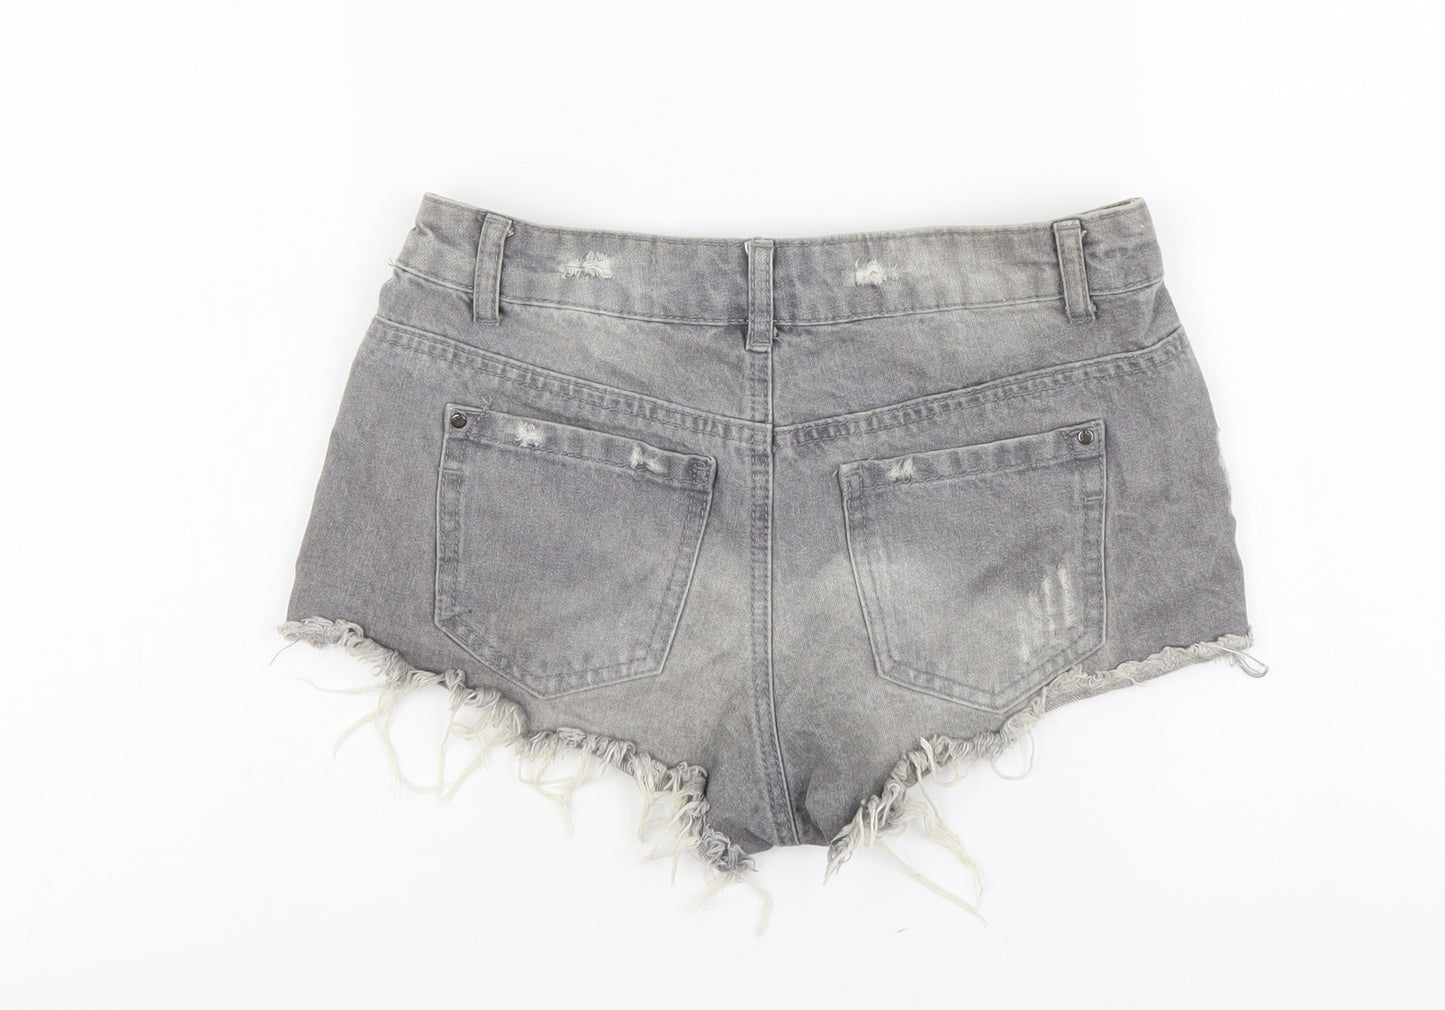 Denim & Co. Womens Grey Cotton Hot Pants Shorts Size 6 L3 in Regular Button - Distressed